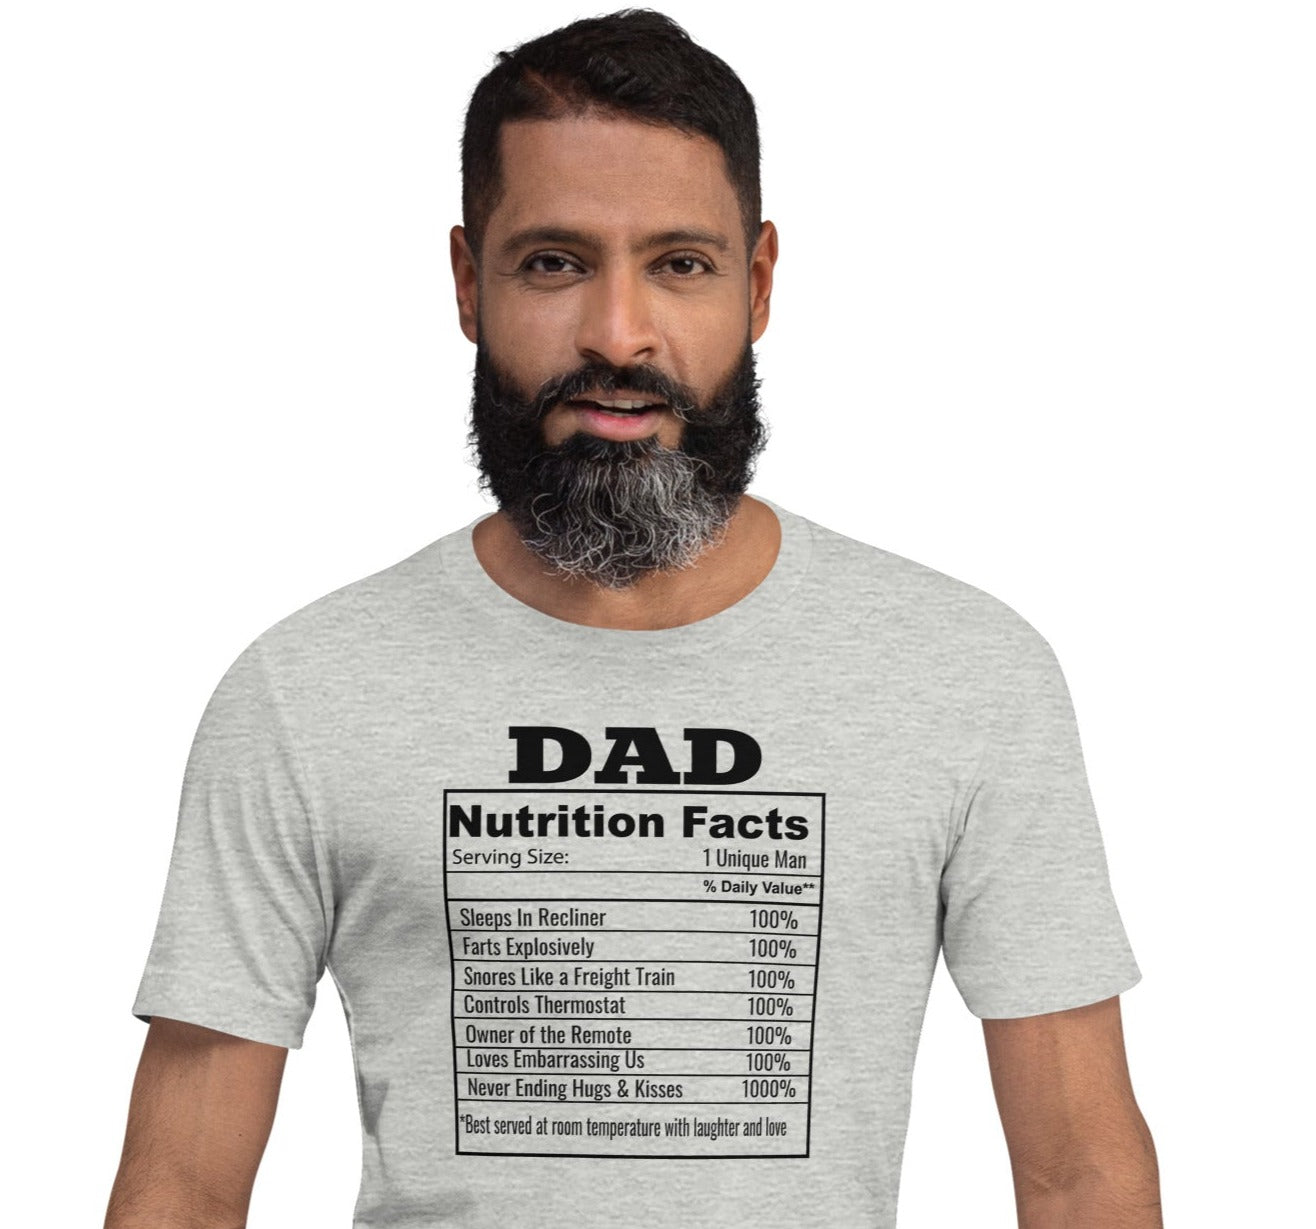 Dad Nutrition Facts T-Shirt for Father's Day